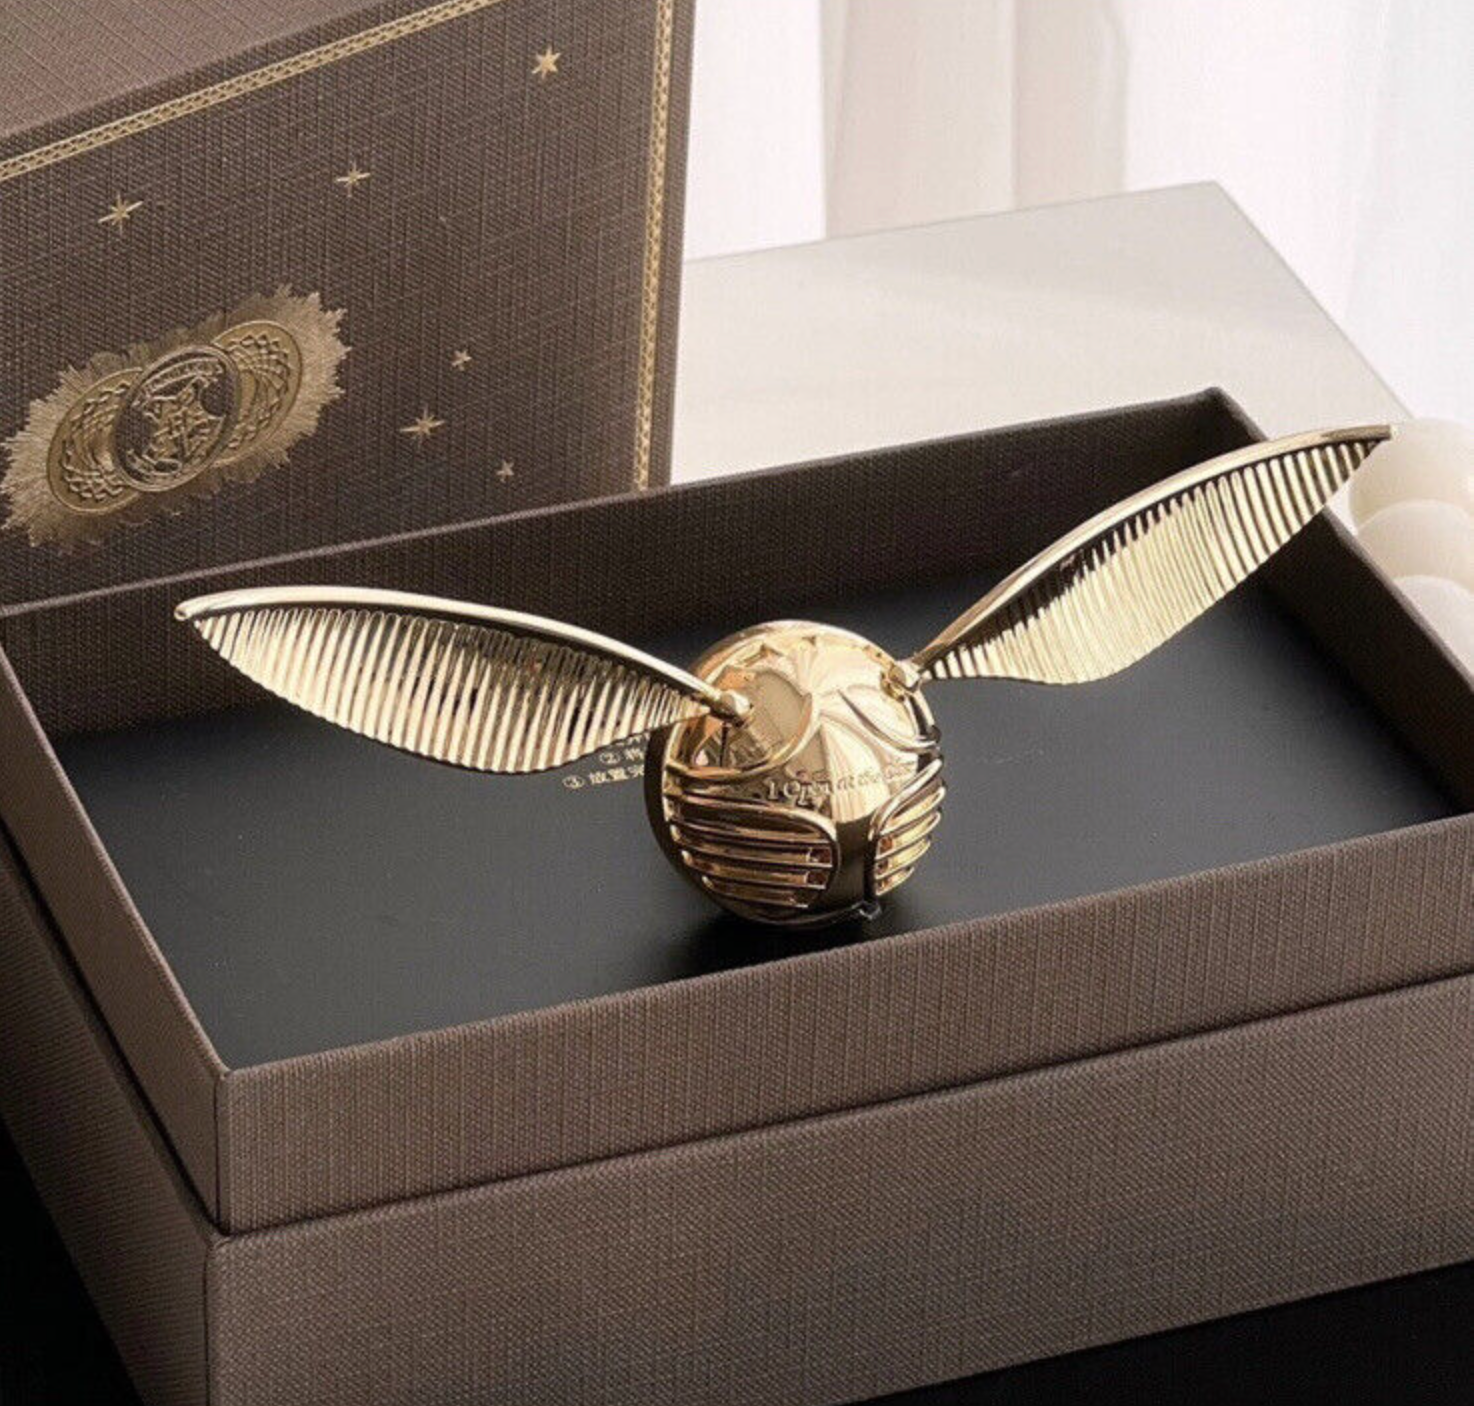 Golden Snitch Car Air Fresheners